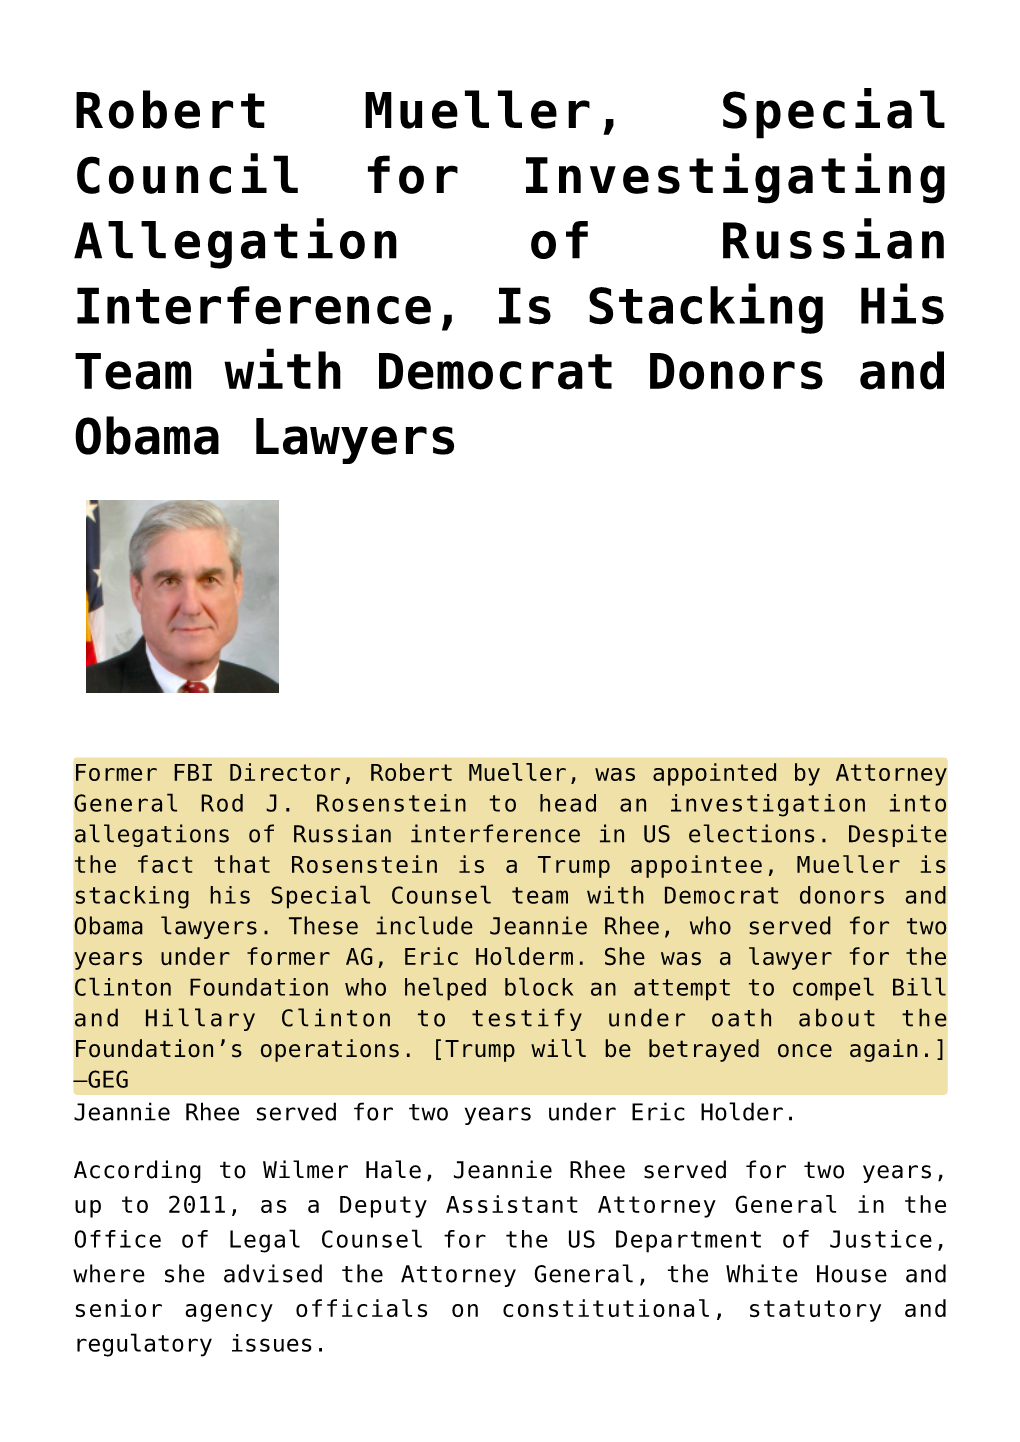 Robert Mueller, Special Council for Investigating Allegation of Russian Interference, Is Stacking His Team with Democrat Donors and Obama Lawyers